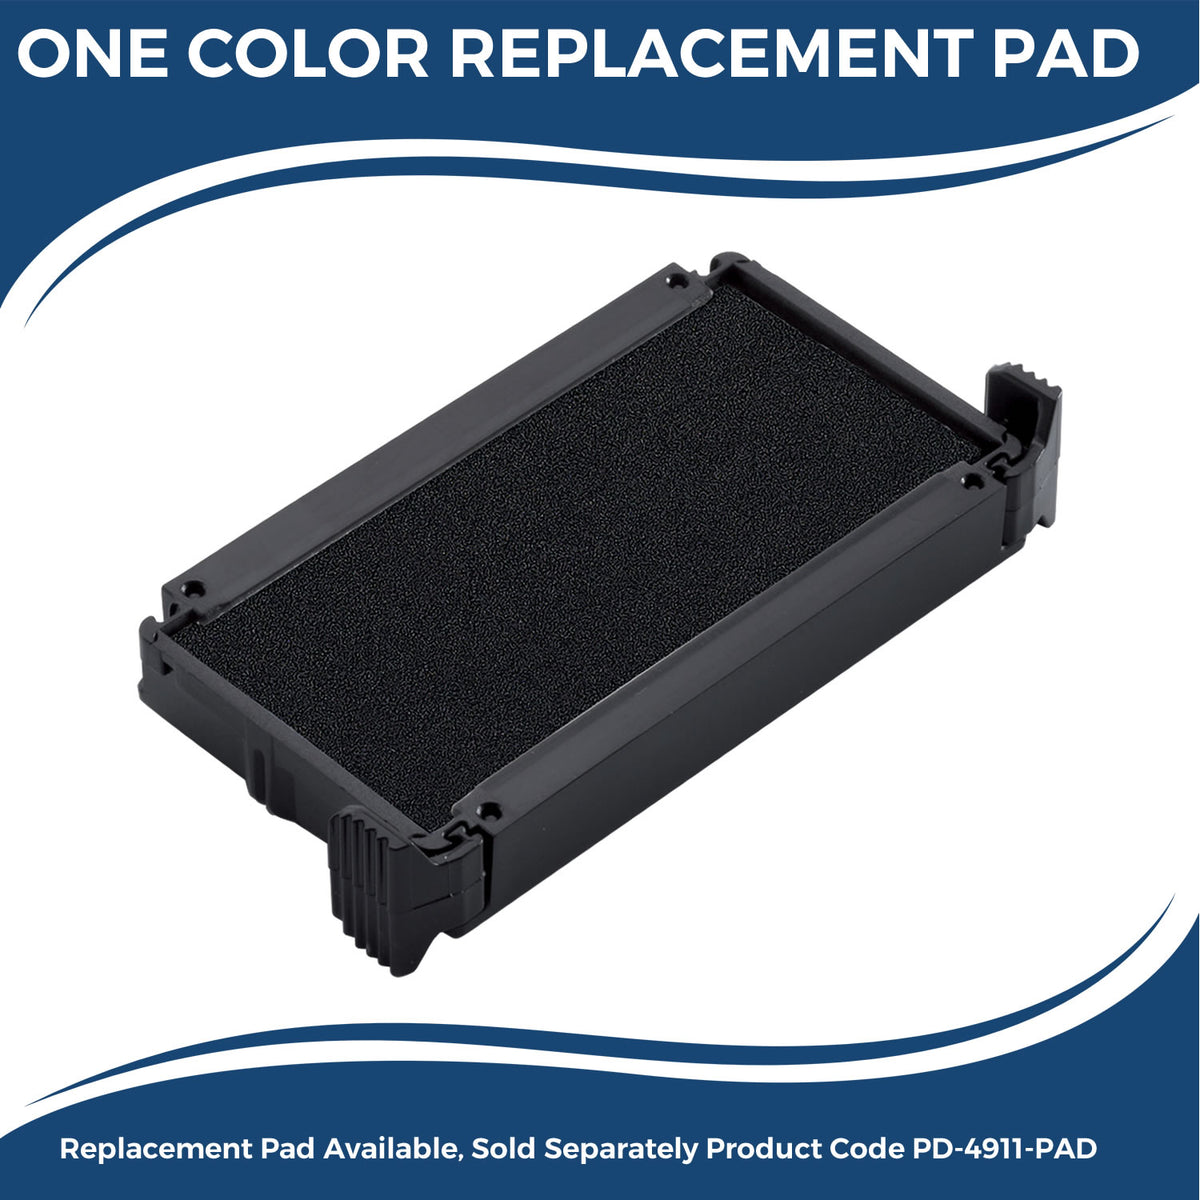 Self-Inking Economy Mail Stamp 4066S Small Replacment Pad